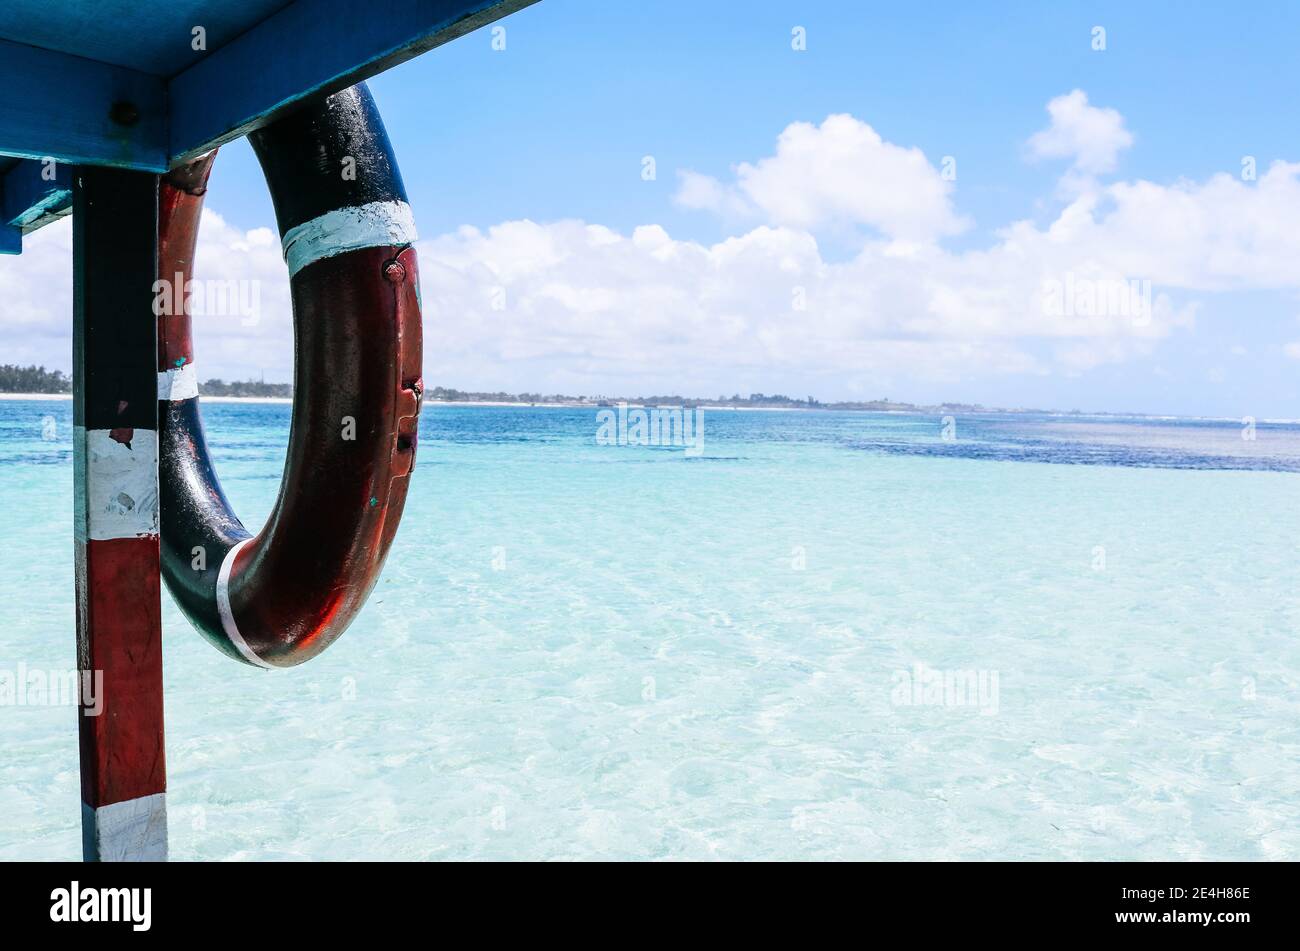 Close up of a Boat with a lifesaver on Crystal clear, turquoise, tropical water Stock Photo